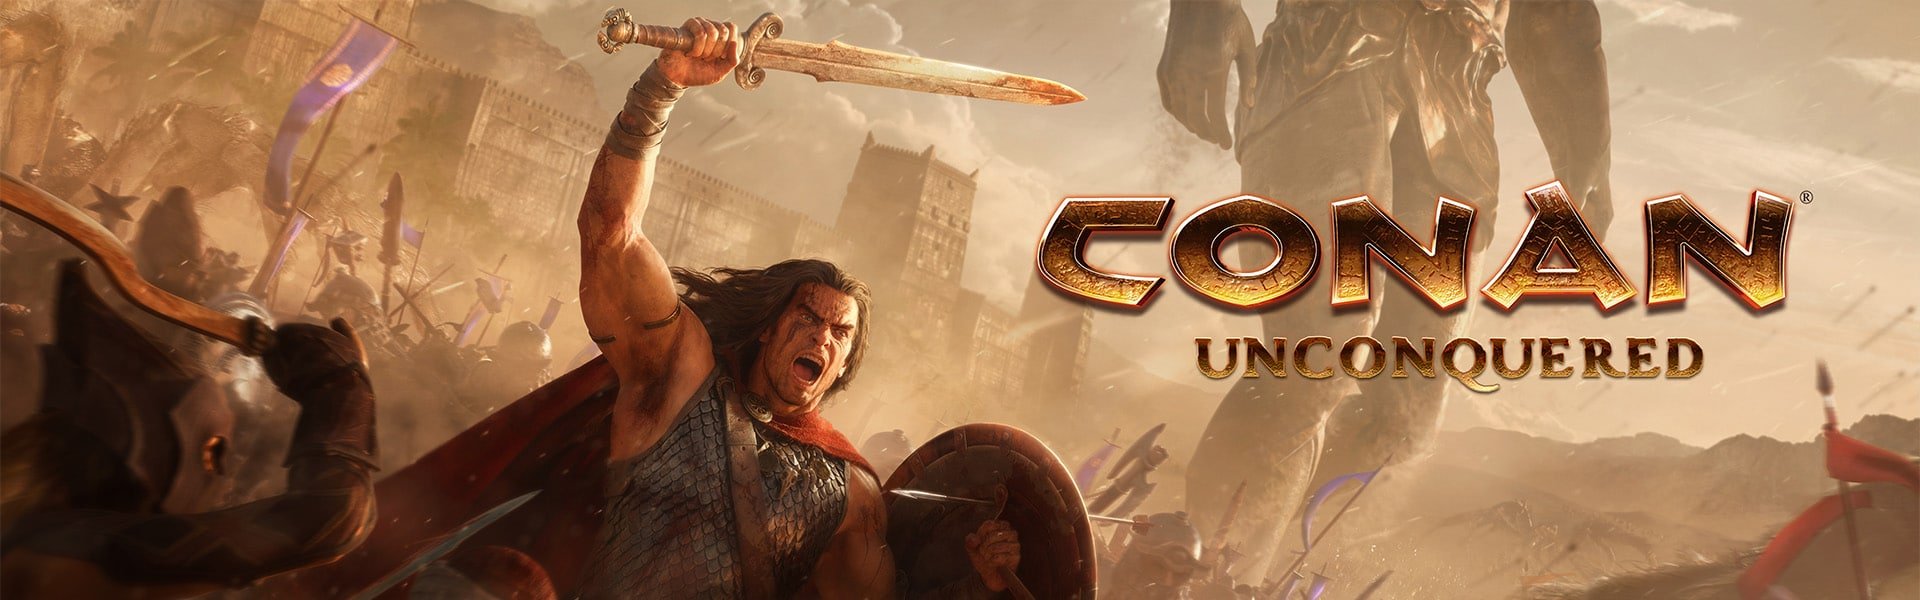 Survival RTS, Conan Unconquered, is now out! 12